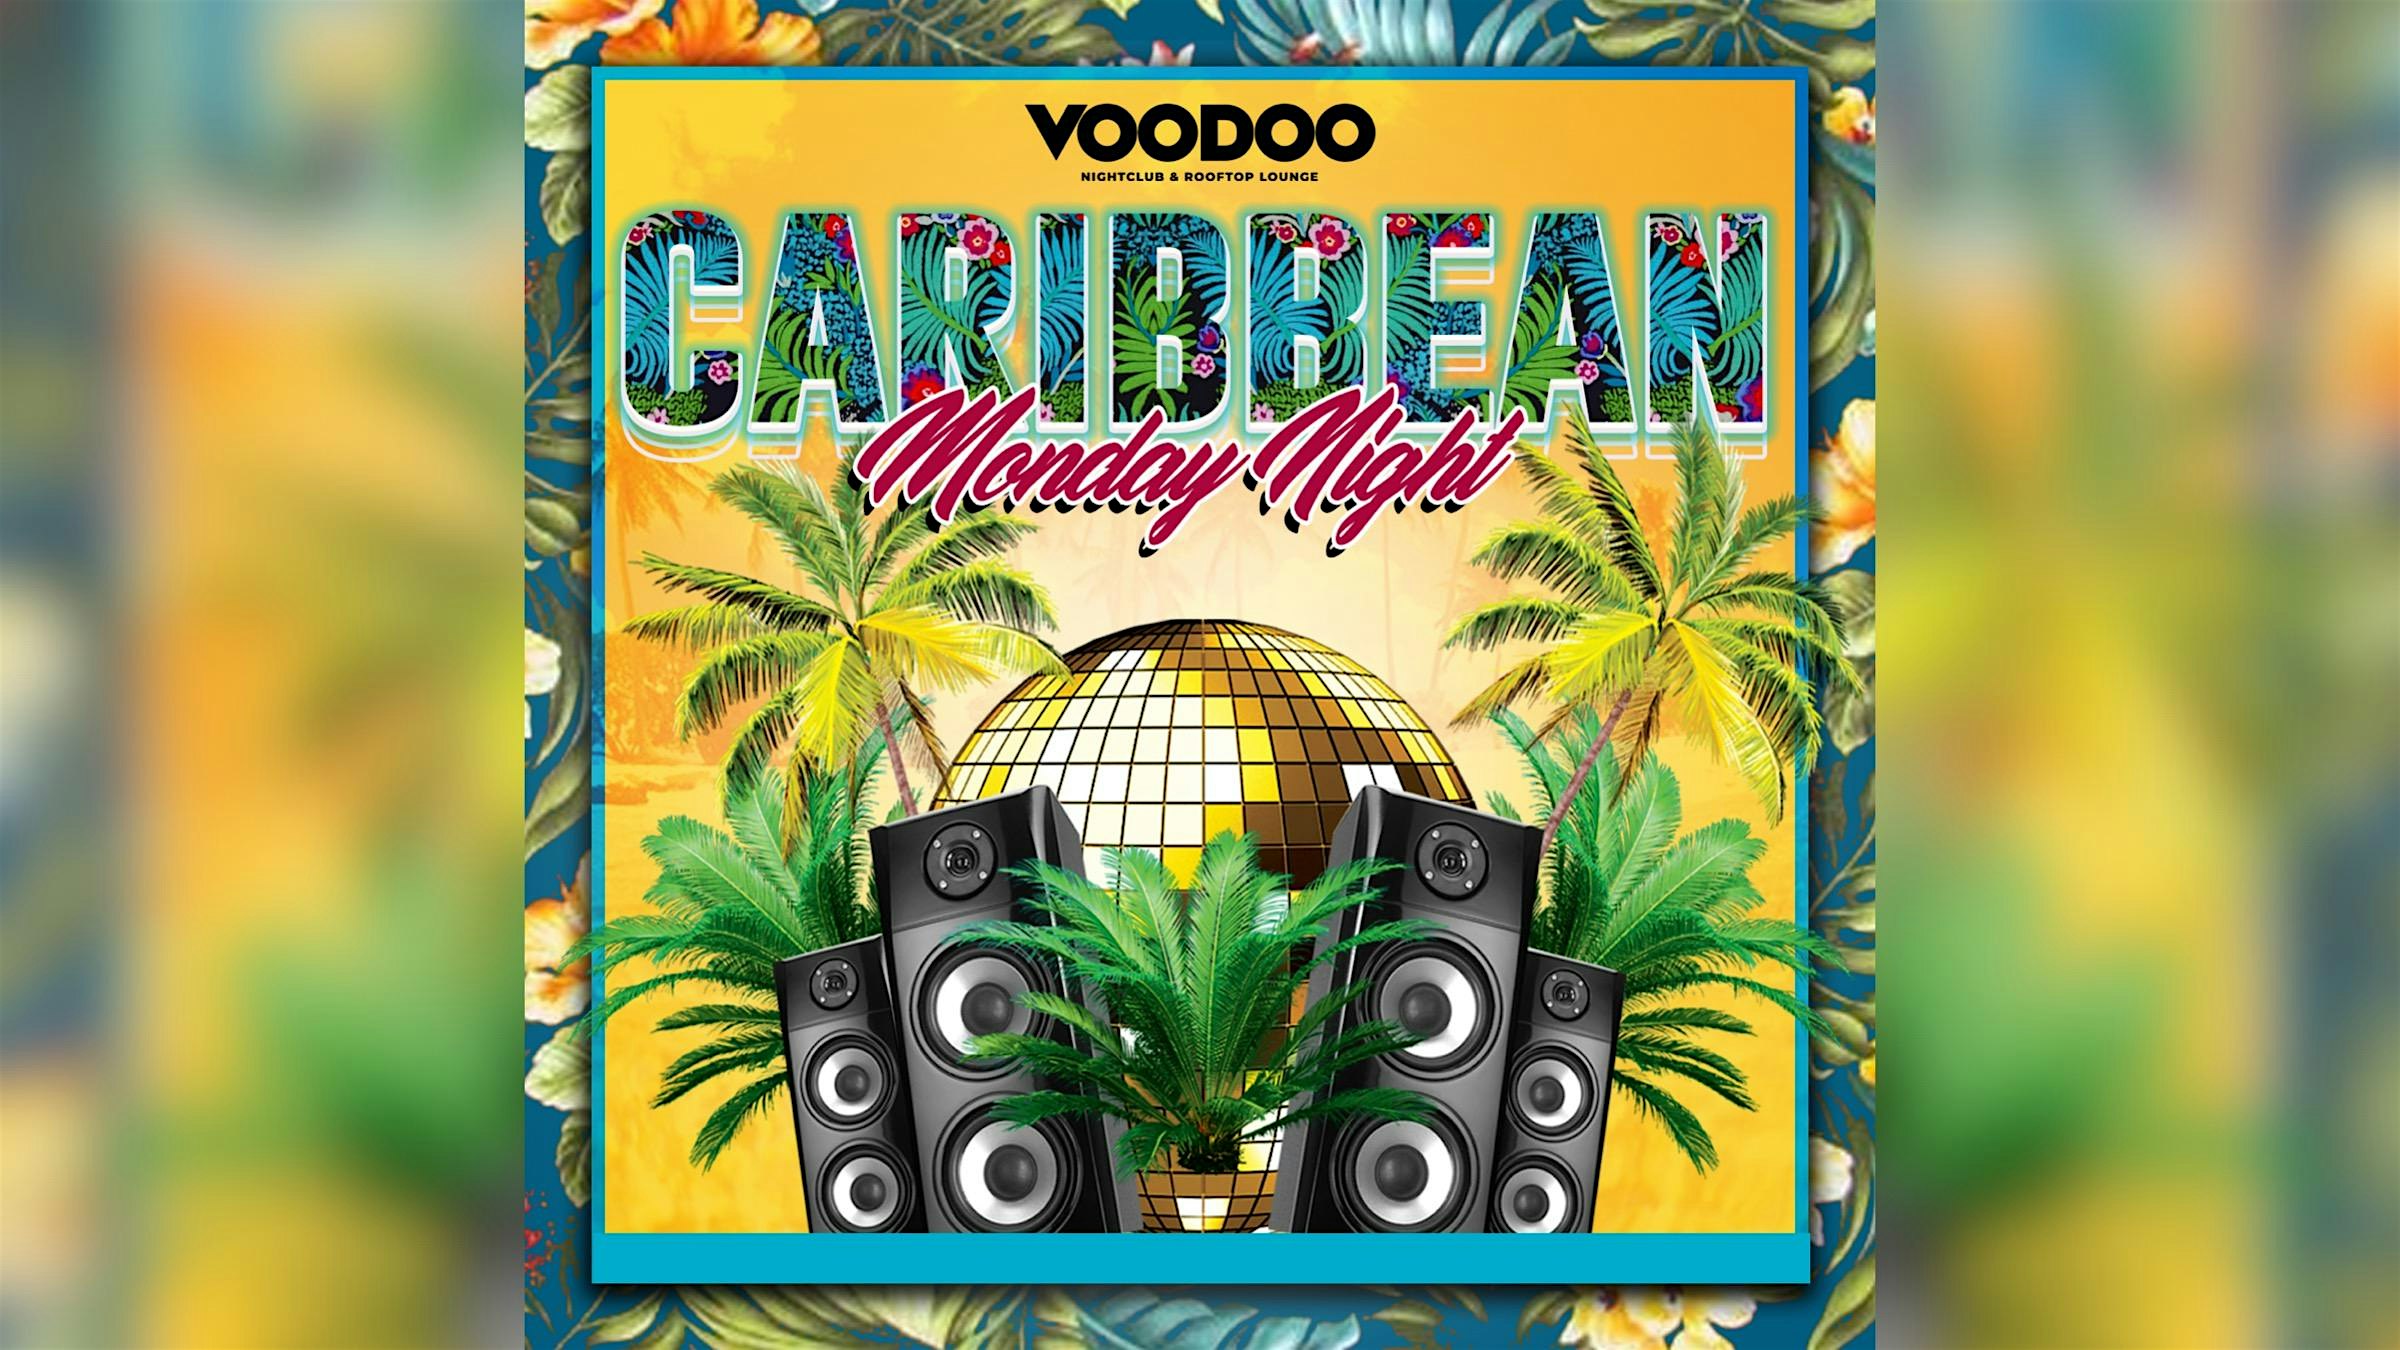 Monday Party - Voodoo South Beach